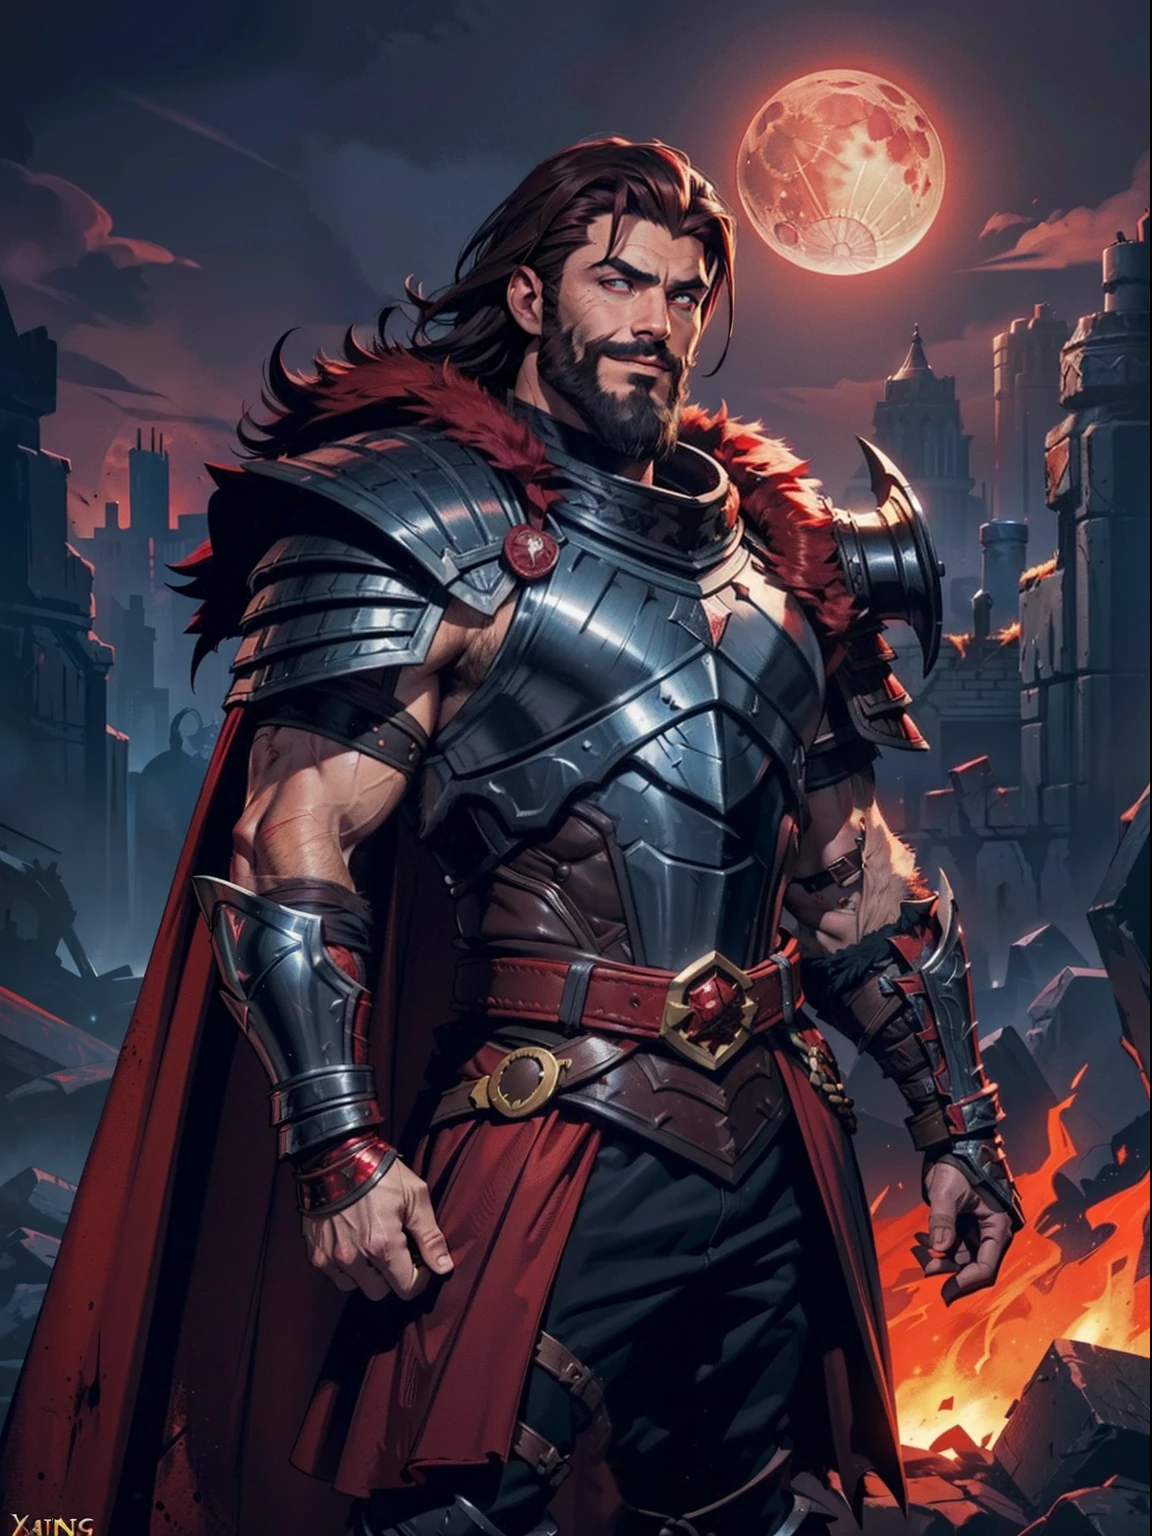 Dark night blood moon background, Darkest Dungeon style, game portrait. Kevin Smith as Ares from Xena, athlete, short mane hair, mullet, defined face, detailed eyes, short beard, glowing red eyes, dark hair, wily smile, badass, dangerous. Wearing full armor with red dragon scales, cape of furs.  Breath fire.